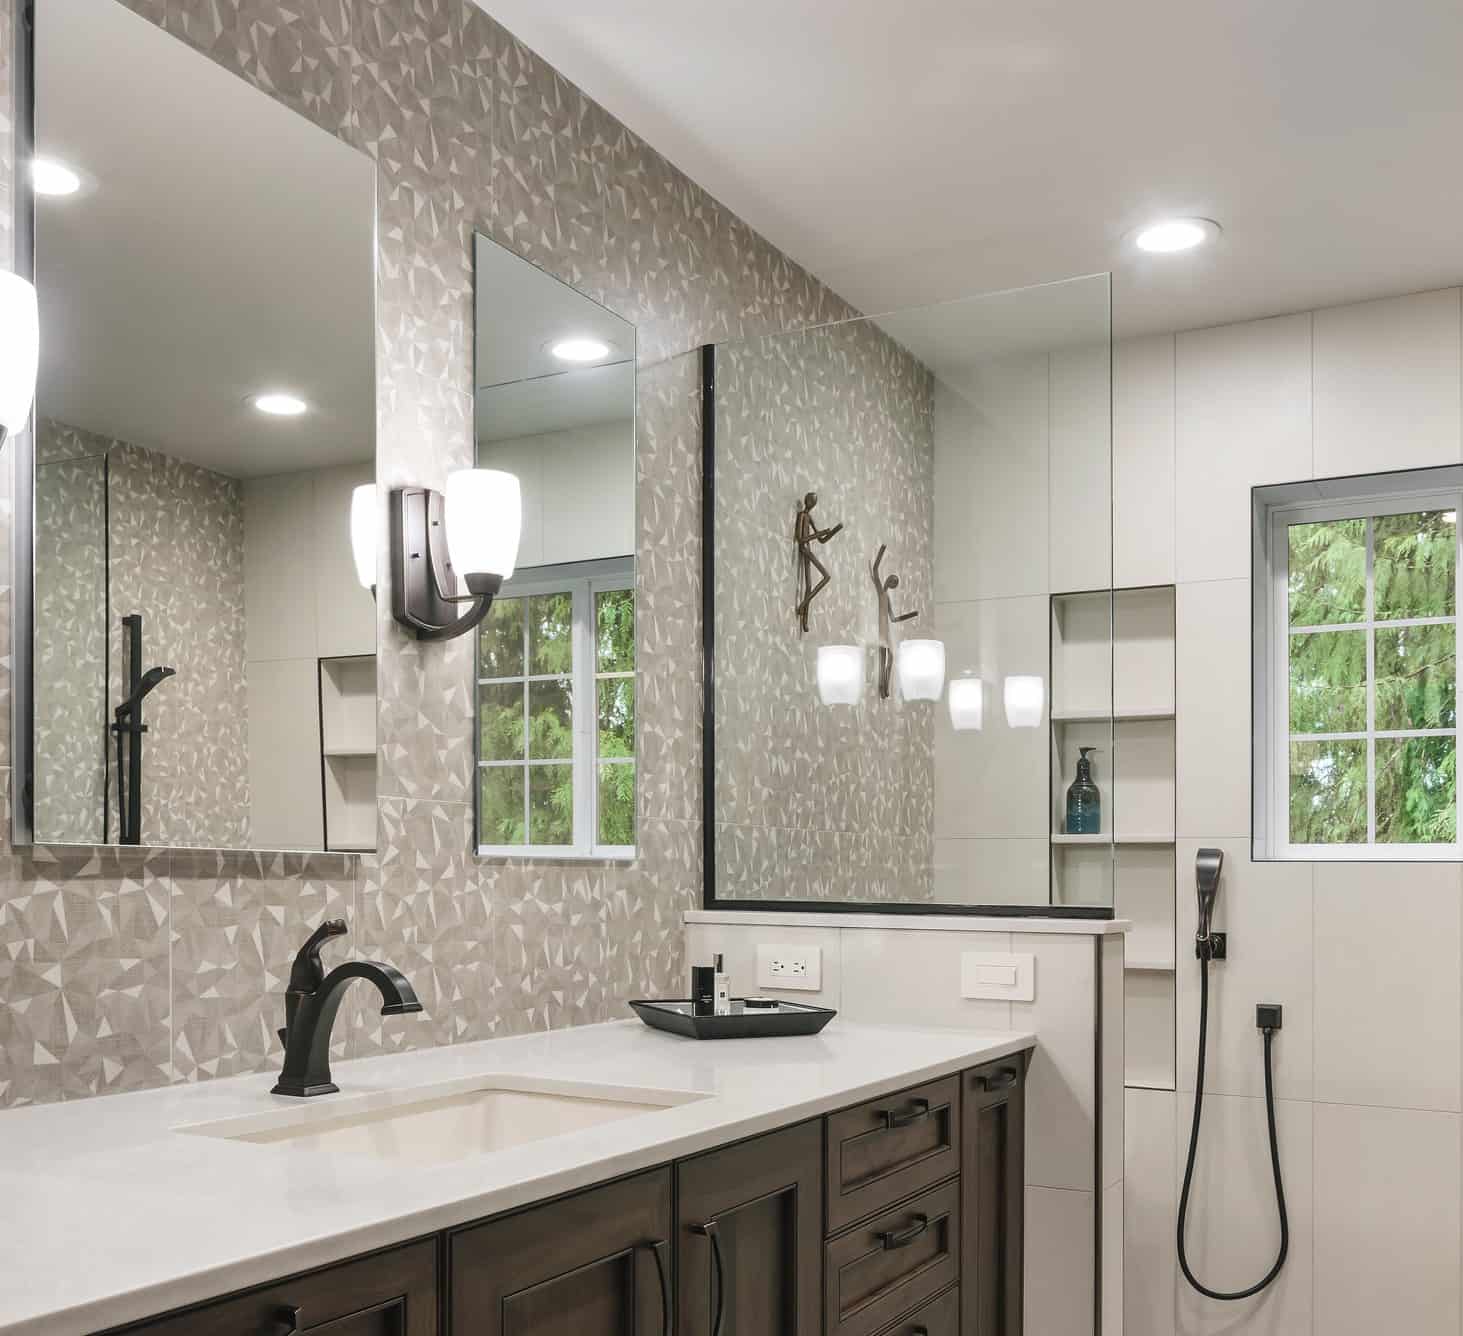 Wall-to-wall tile makes a small bathroom feel larger.